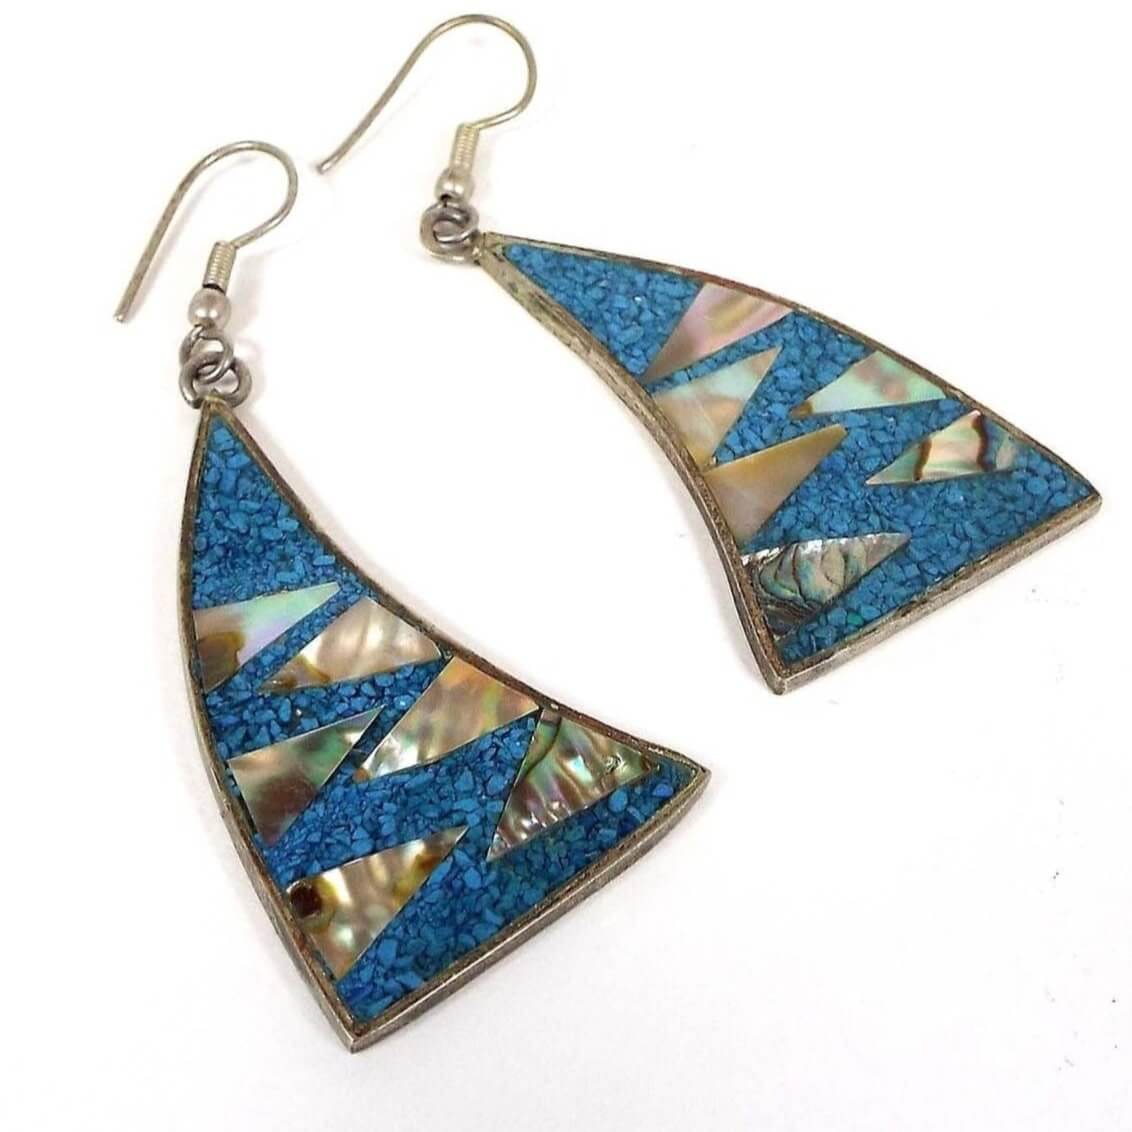 Front view of the Mexican Alpaca earrings. Earrings are triangle shaped with a curve. They are silver in color with aqua blue resin and tiny inlaid stone chips. There small triangle pieces of pearly multi color inlaid abalone shell that point inward from each side of the earring. They have fish hook style earwires at the top.